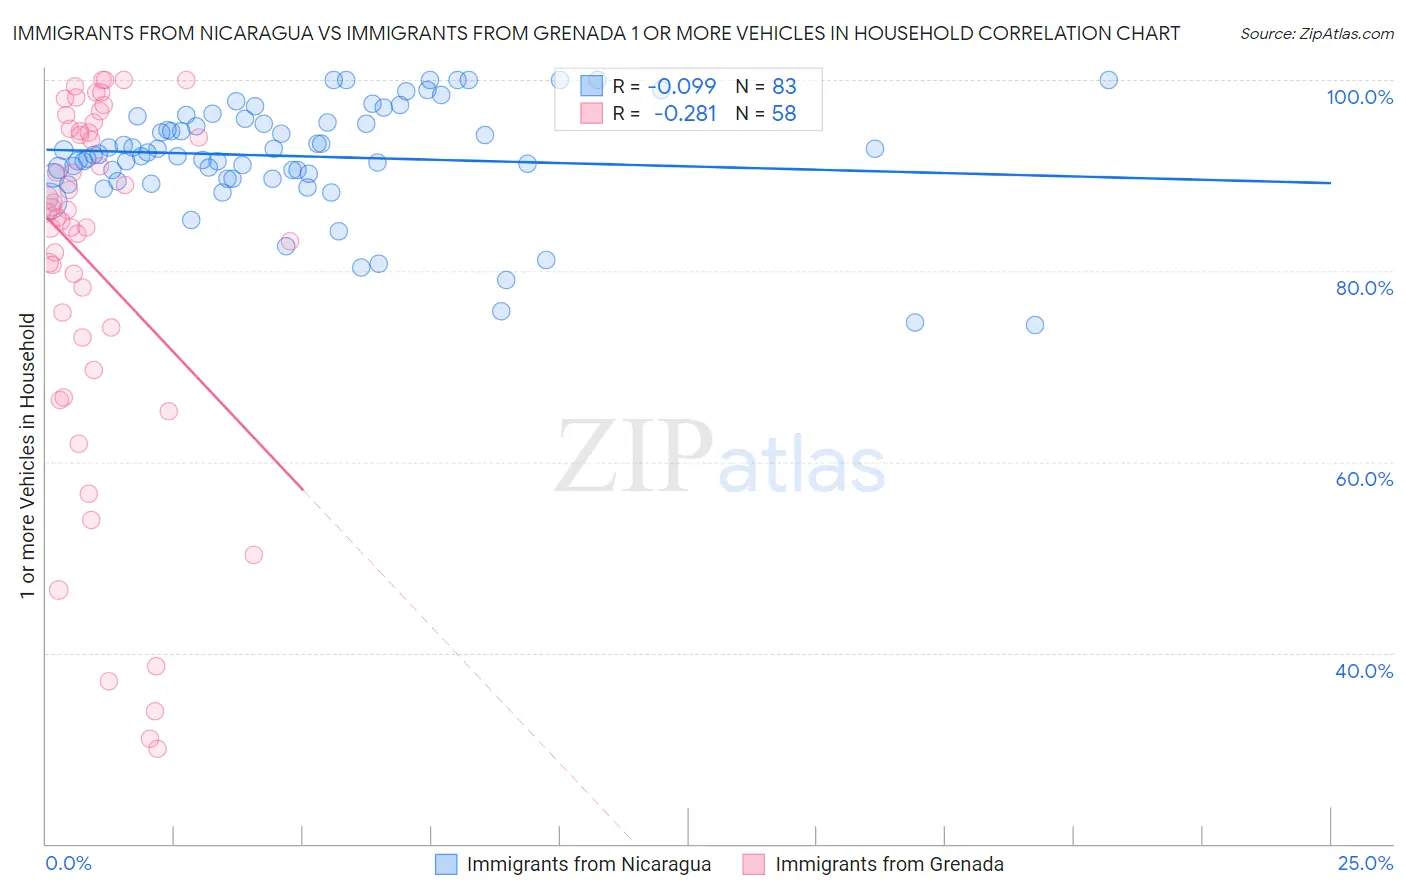 Immigrants from Nicaragua vs Immigrants from Grenada 1 or more Vehicles in Household